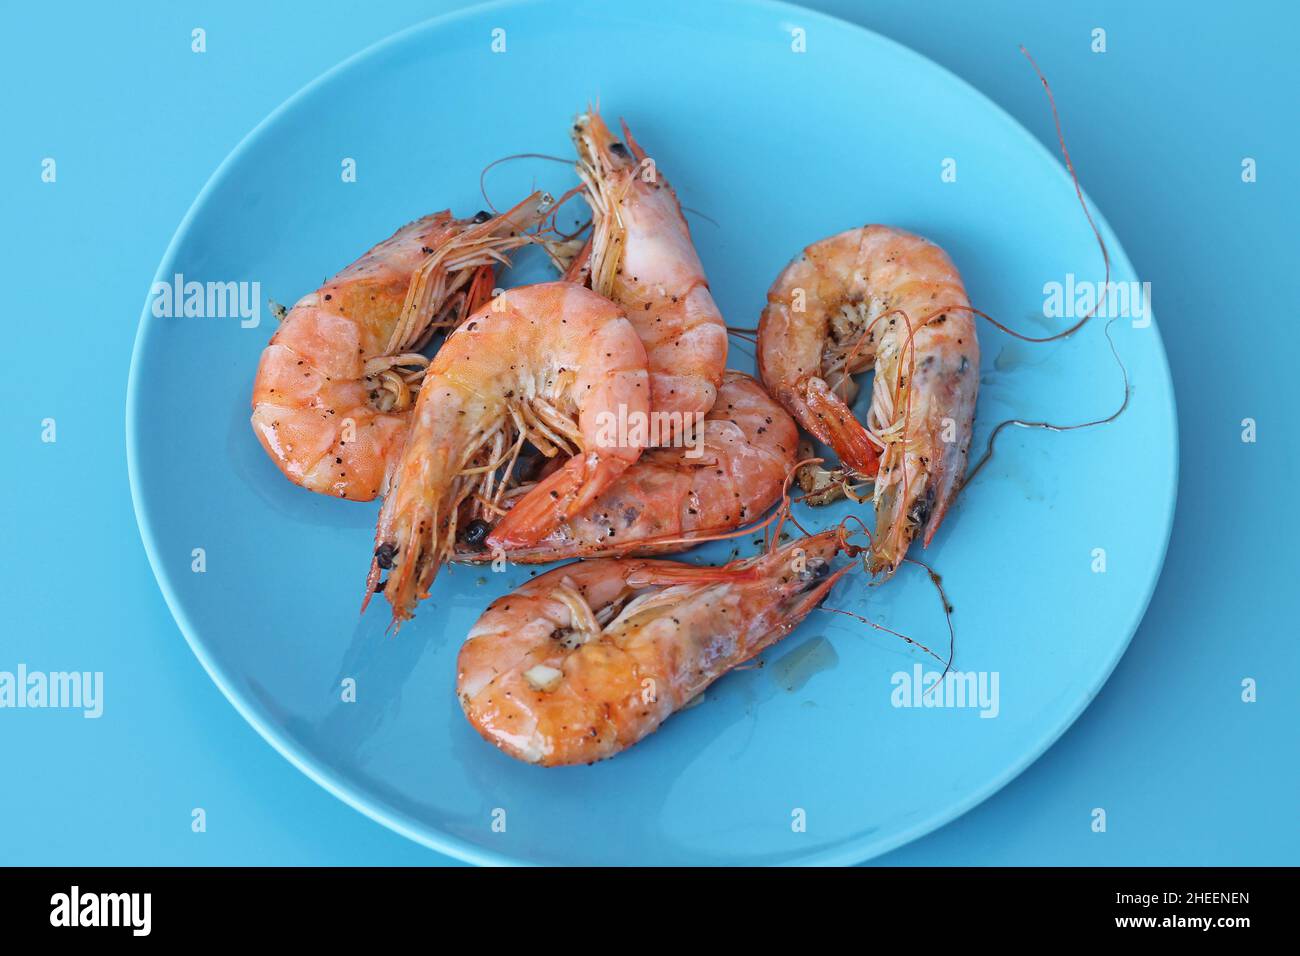 Boiled shrimps on blue plate. Healthy sea food. Stock Photo